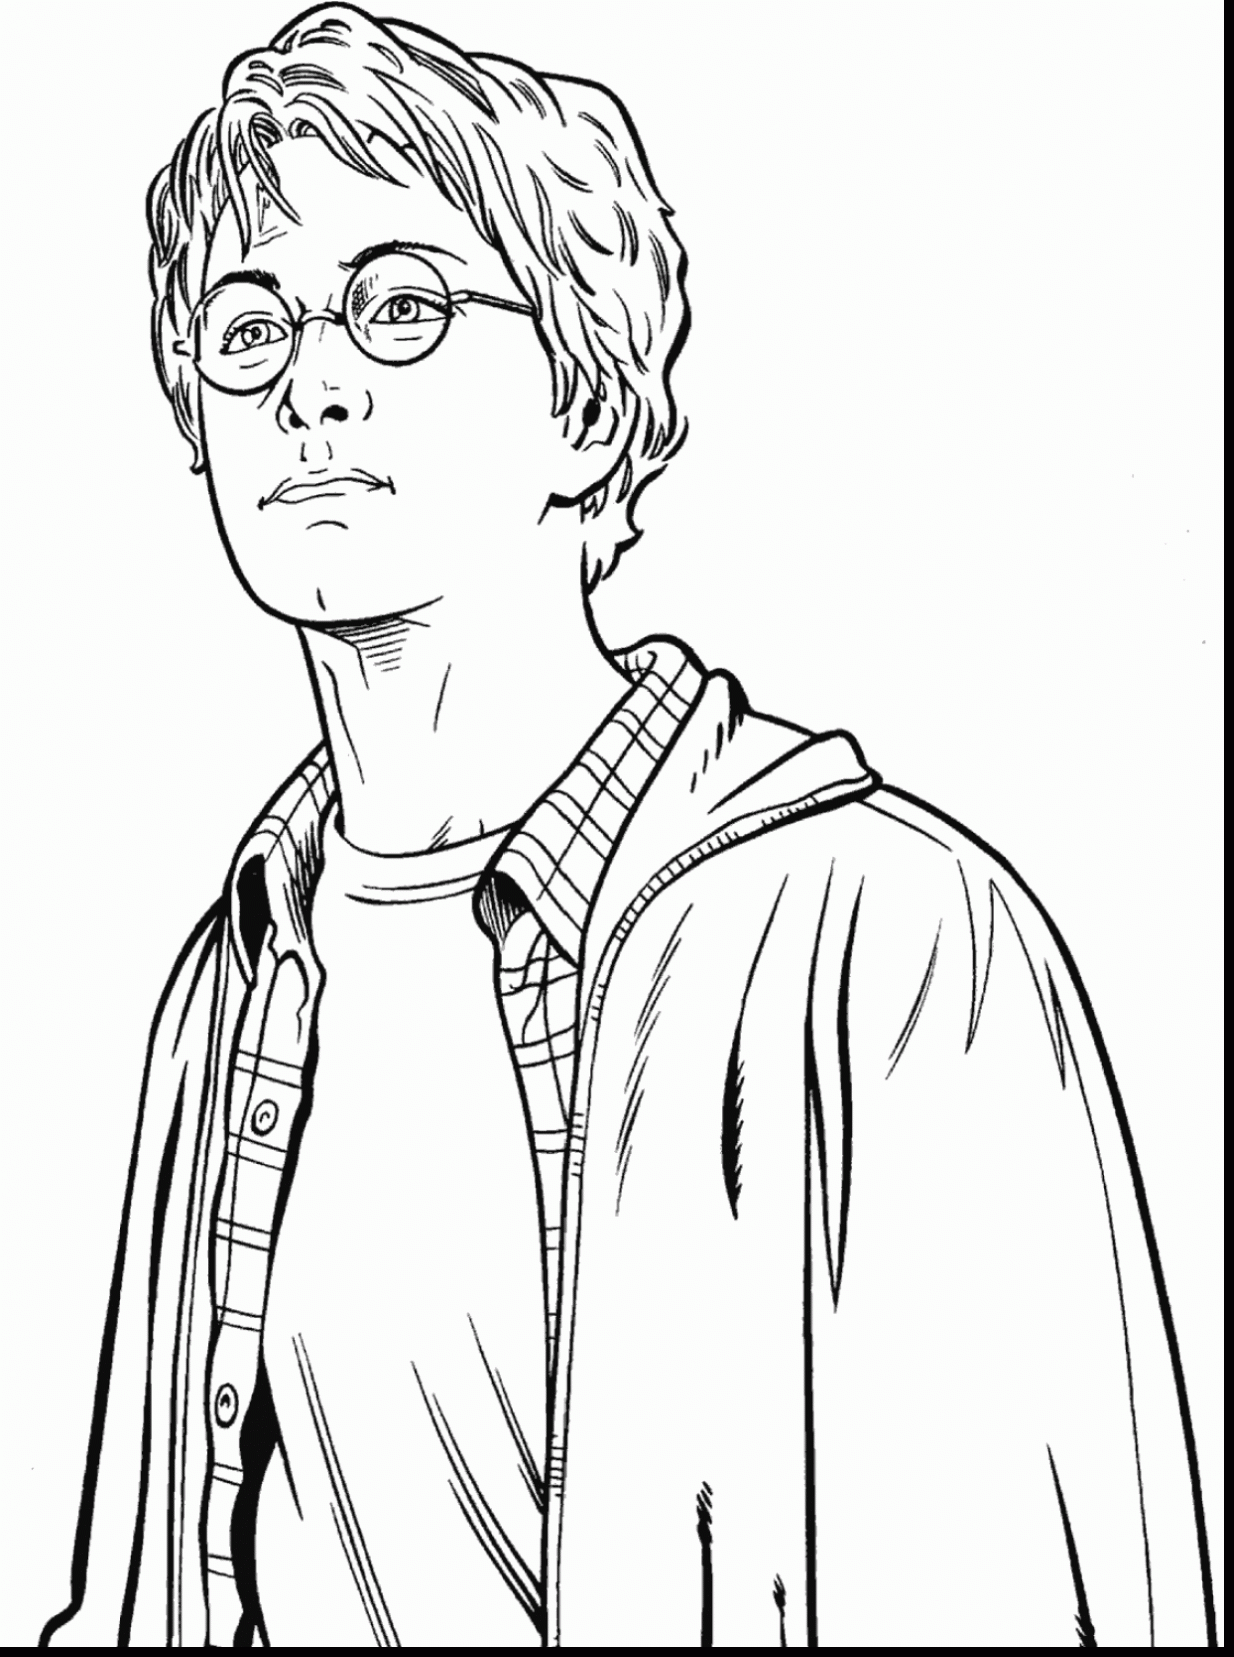 Download Cool Harry Potter Coloring Page - Free Printable Coloring Pages for Kids